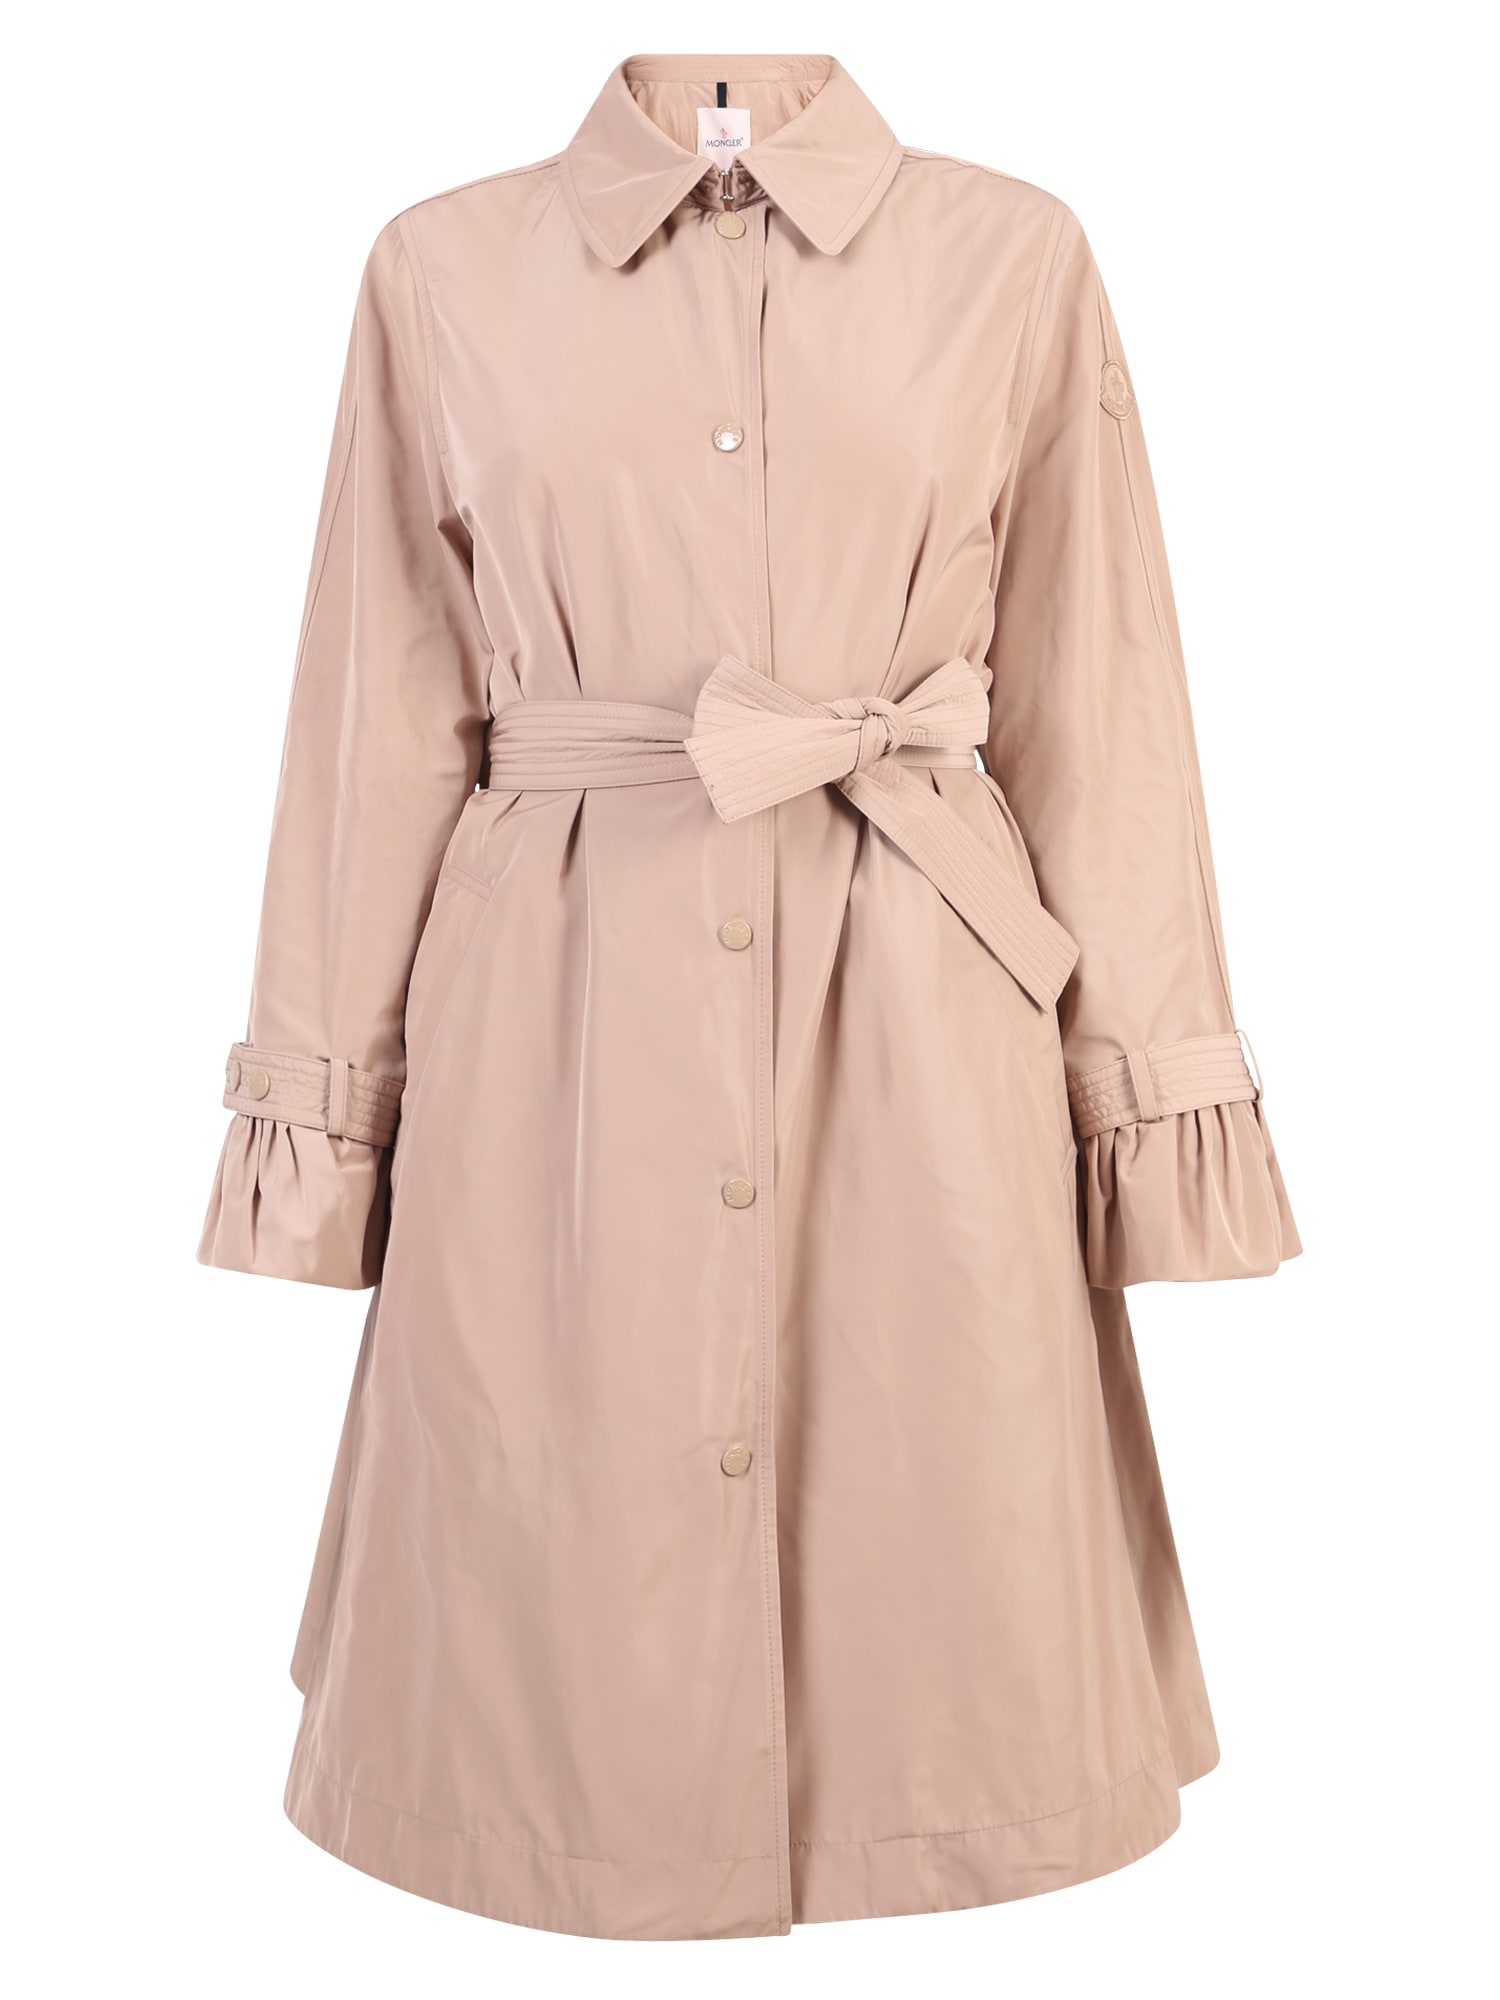 MONCLER TRENCH COAT,1C745 - 00 54543 221